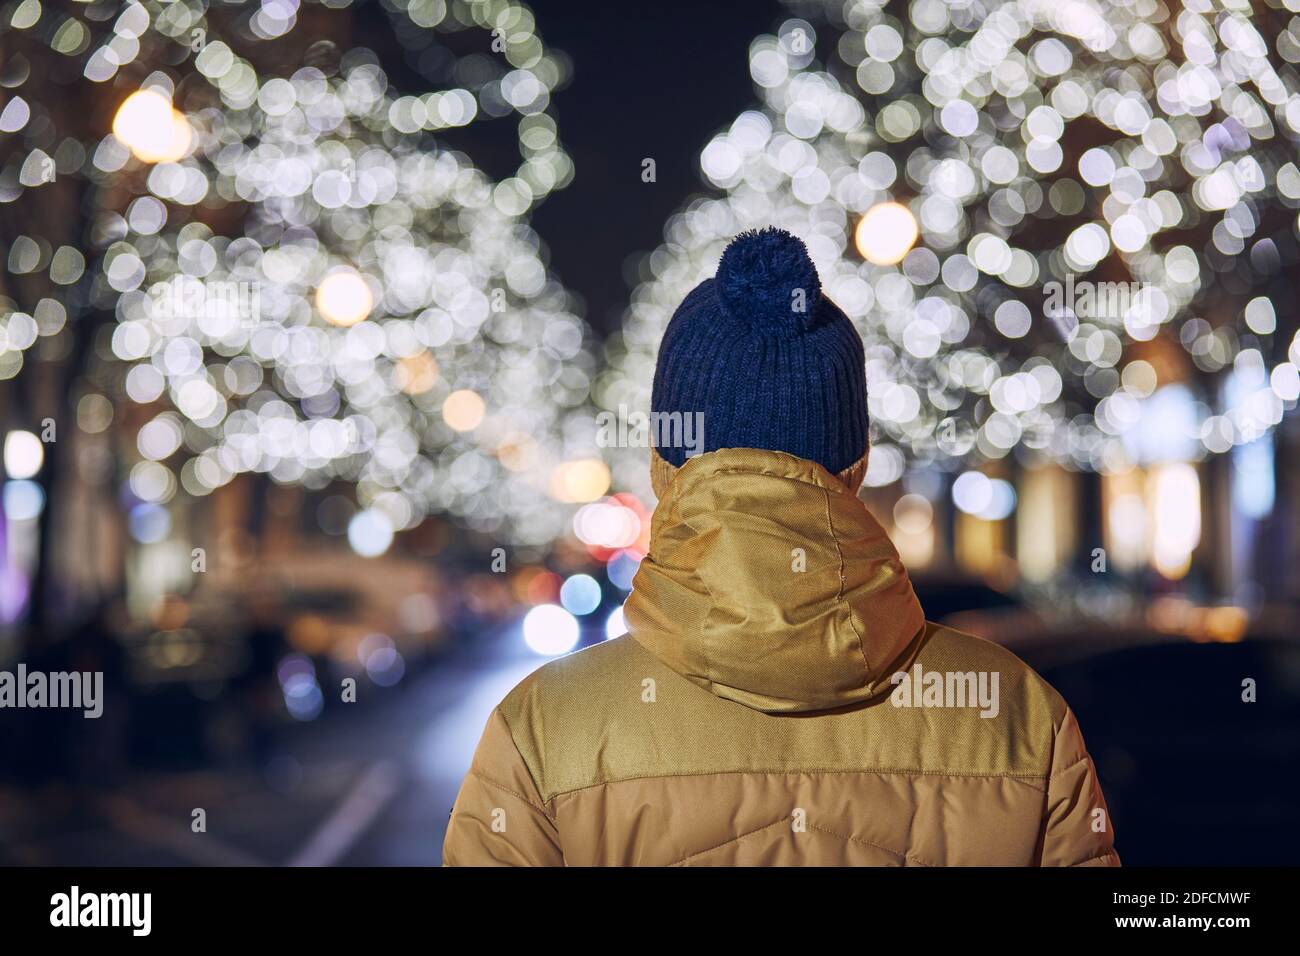 Christmas holiday in city. Rear view of young man against illuminated street with shops. Prague, Czech Republic. Stock Photo